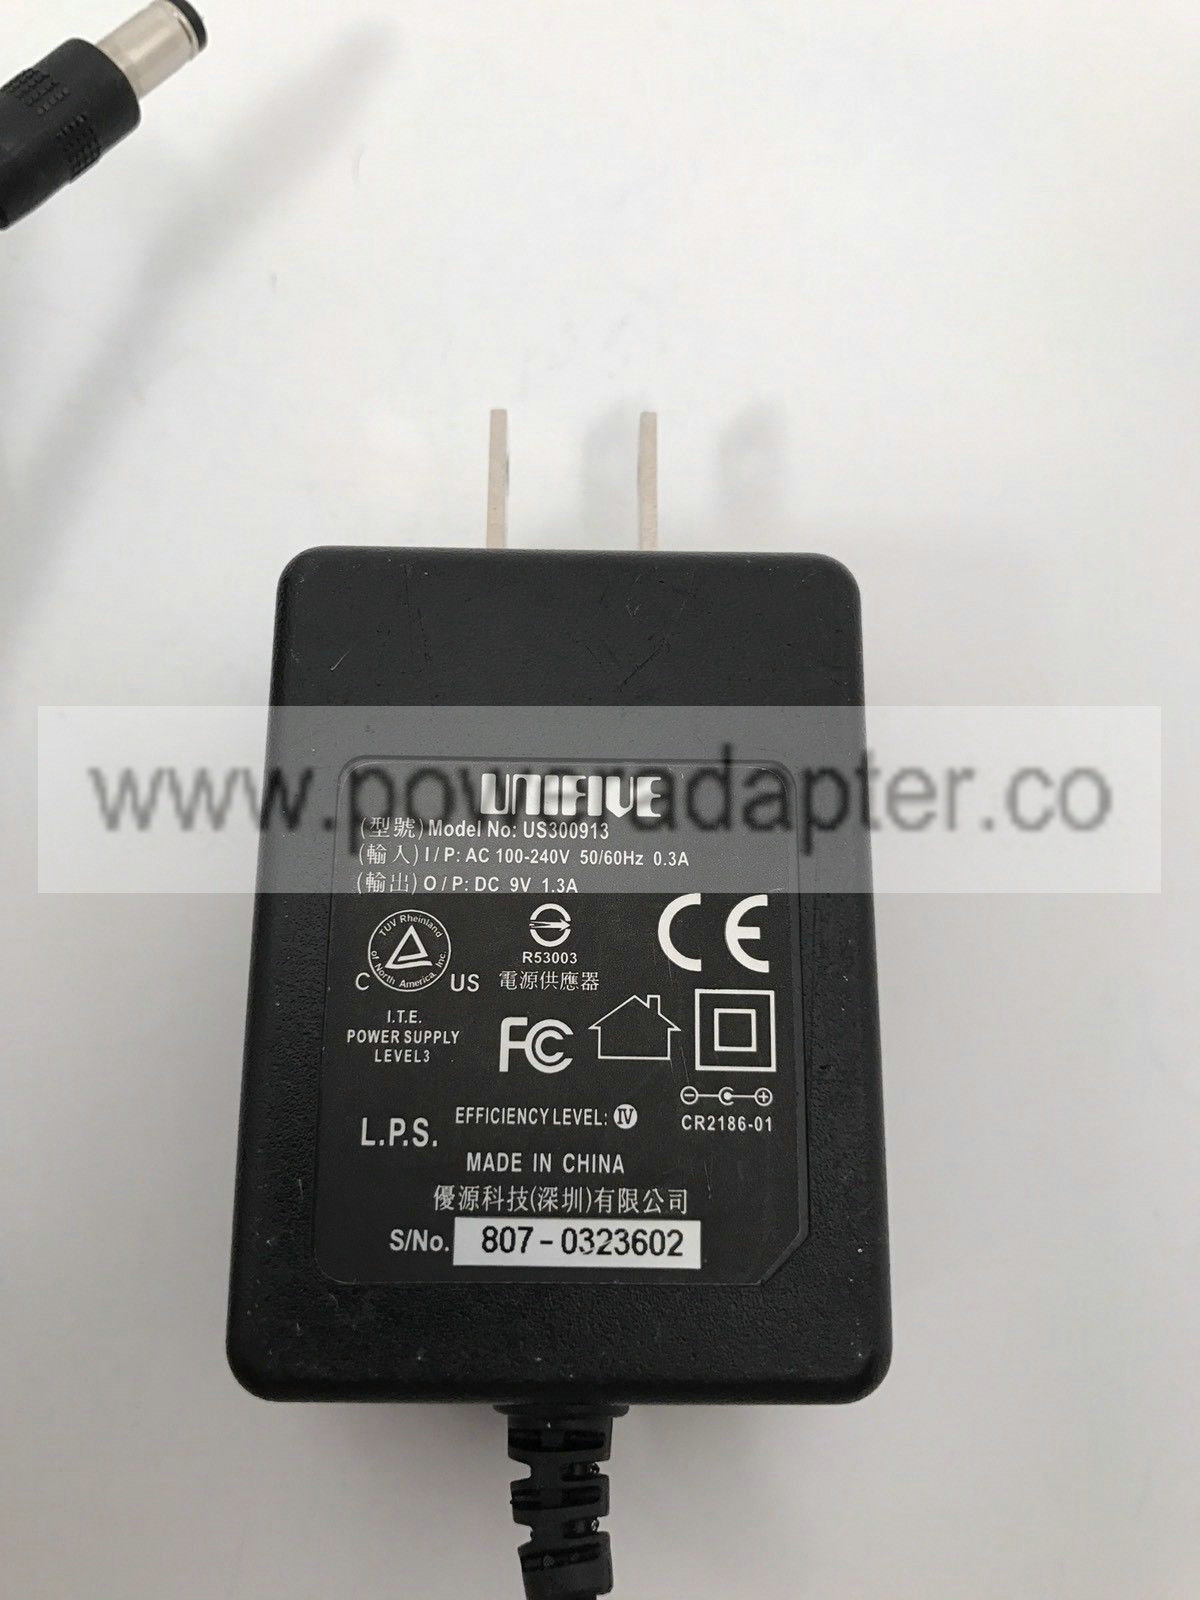 Model US300913 UNIFIVE ac/dc power adapter for Gyration AC Adapter Power Supply